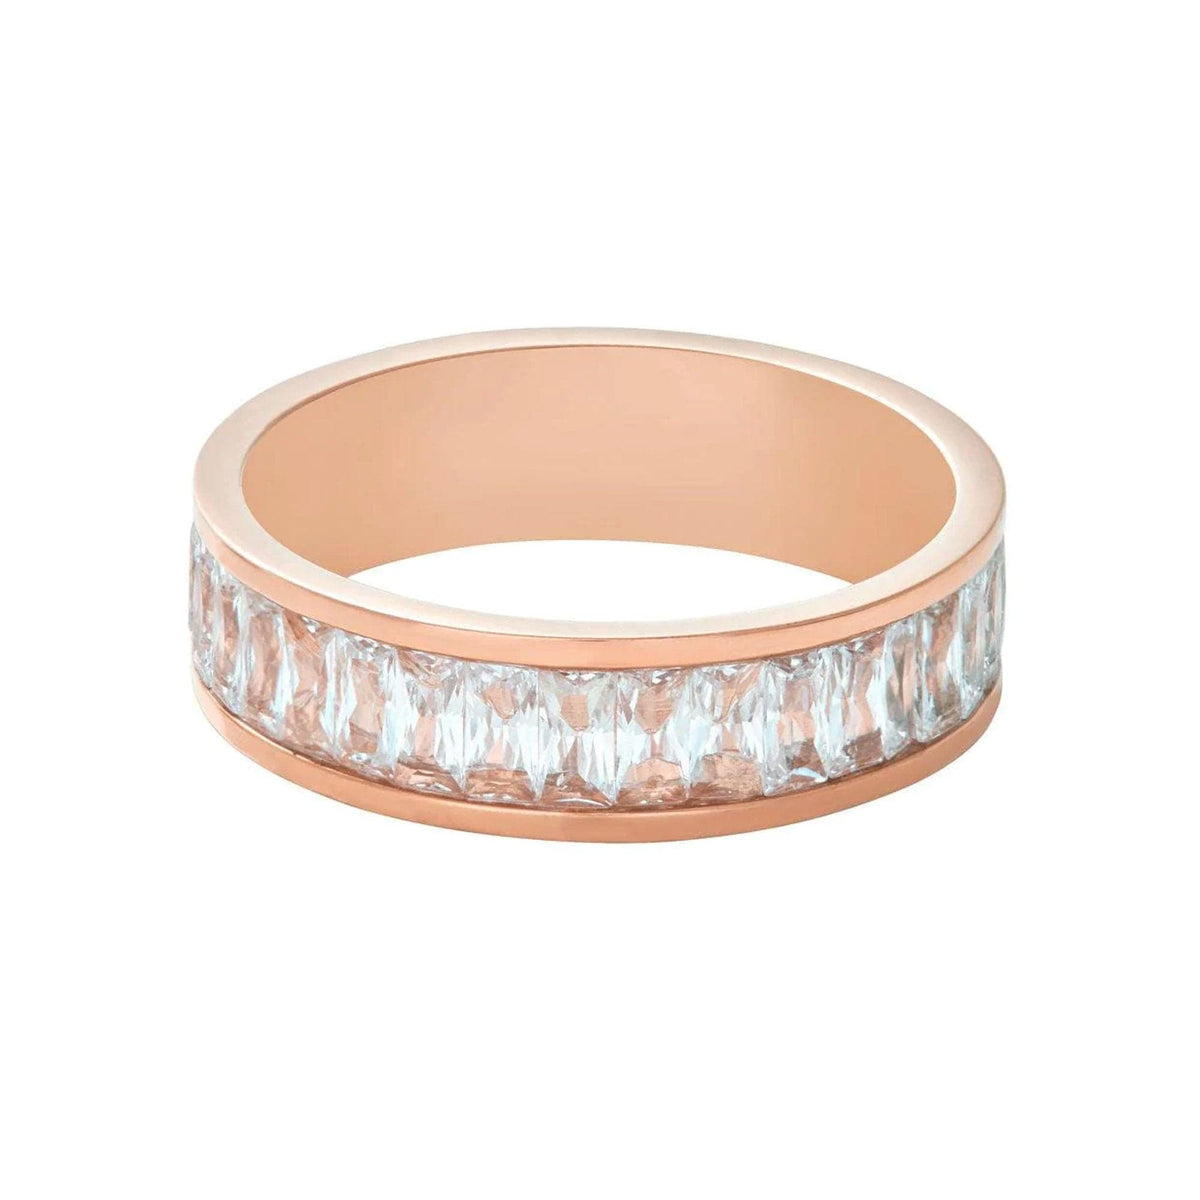 BohoMoon Stainless Steel Alexa Ring Rose Gold / US 6 / UK L / EUR 51 (small)